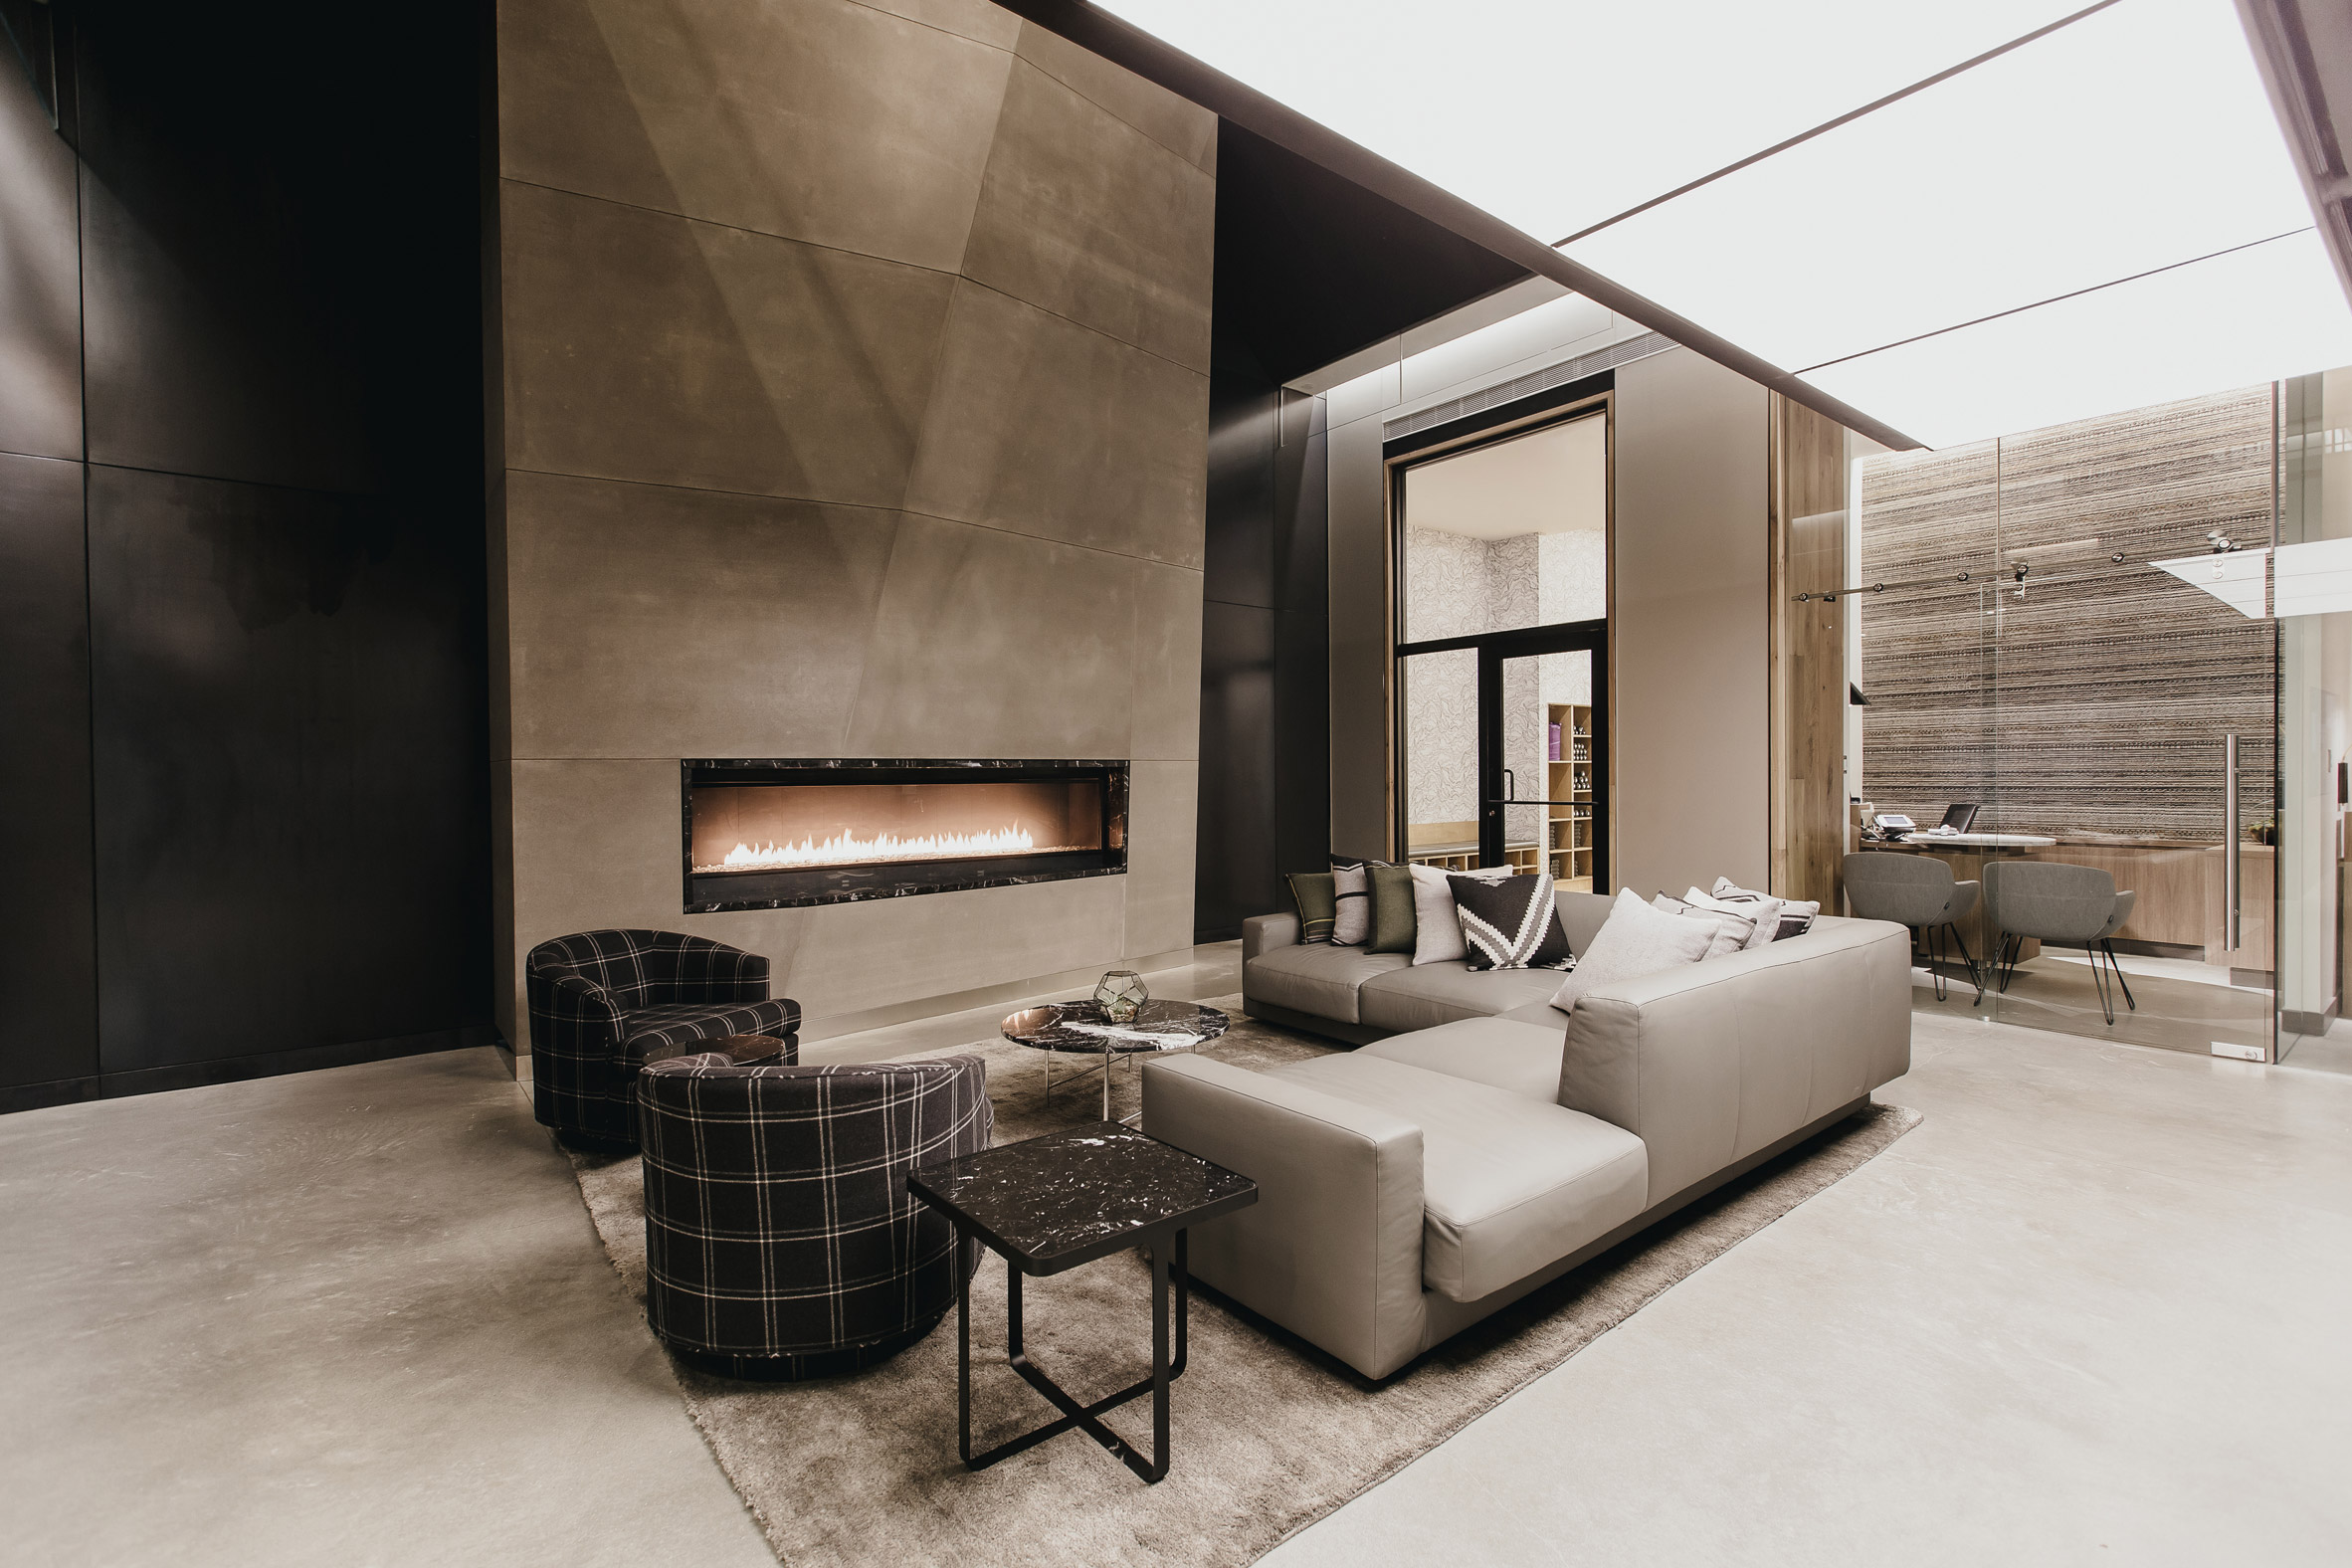 Equinox Vancouver by Montalba Architects